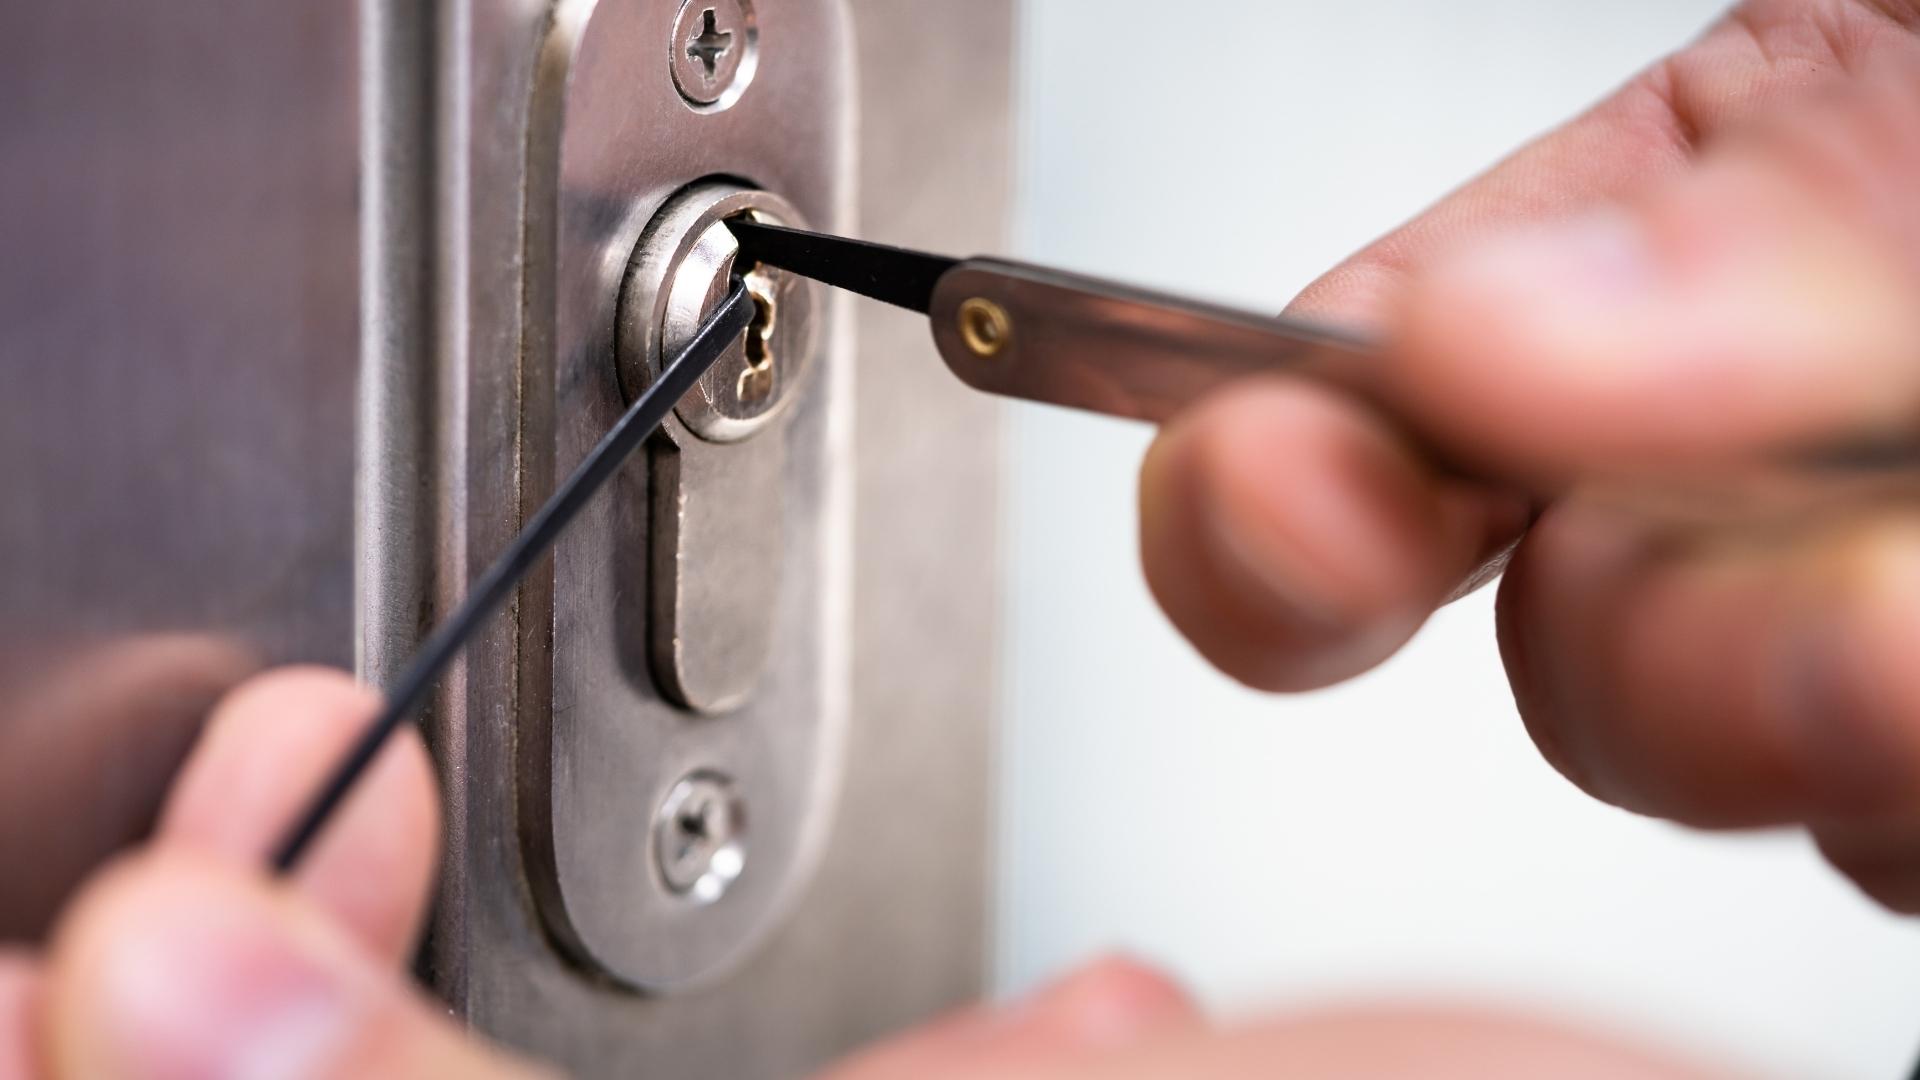 Locksmith working on unlocking the door to a home